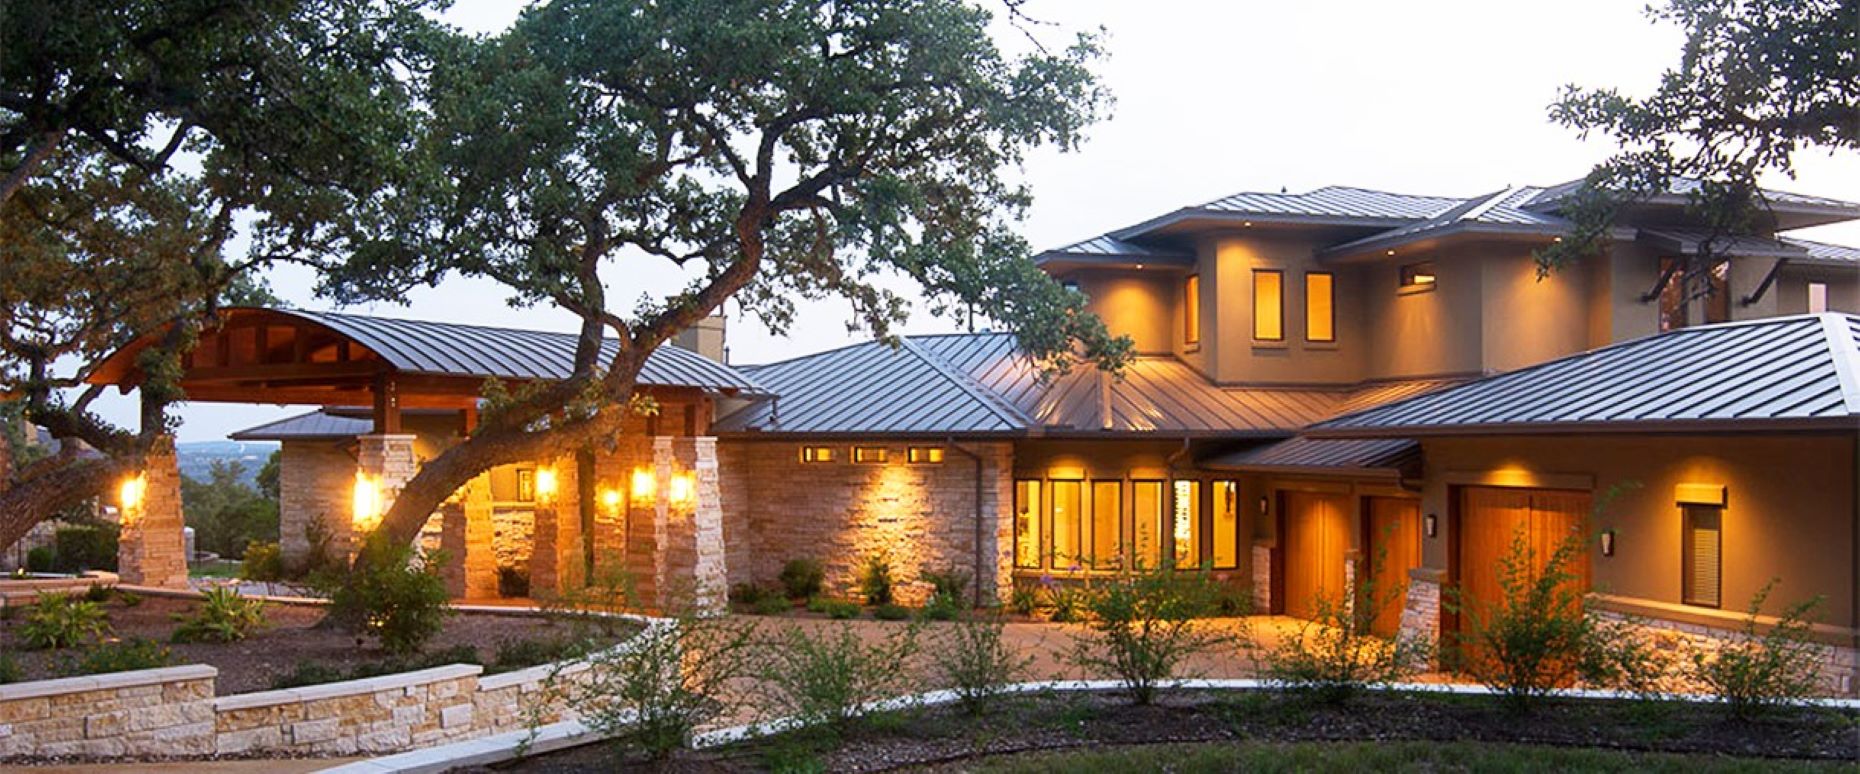 Texas Monthly Hill Country Show Home at Boot Ranch - Transitional - Closet  - Austin - by Design Visions of Austin